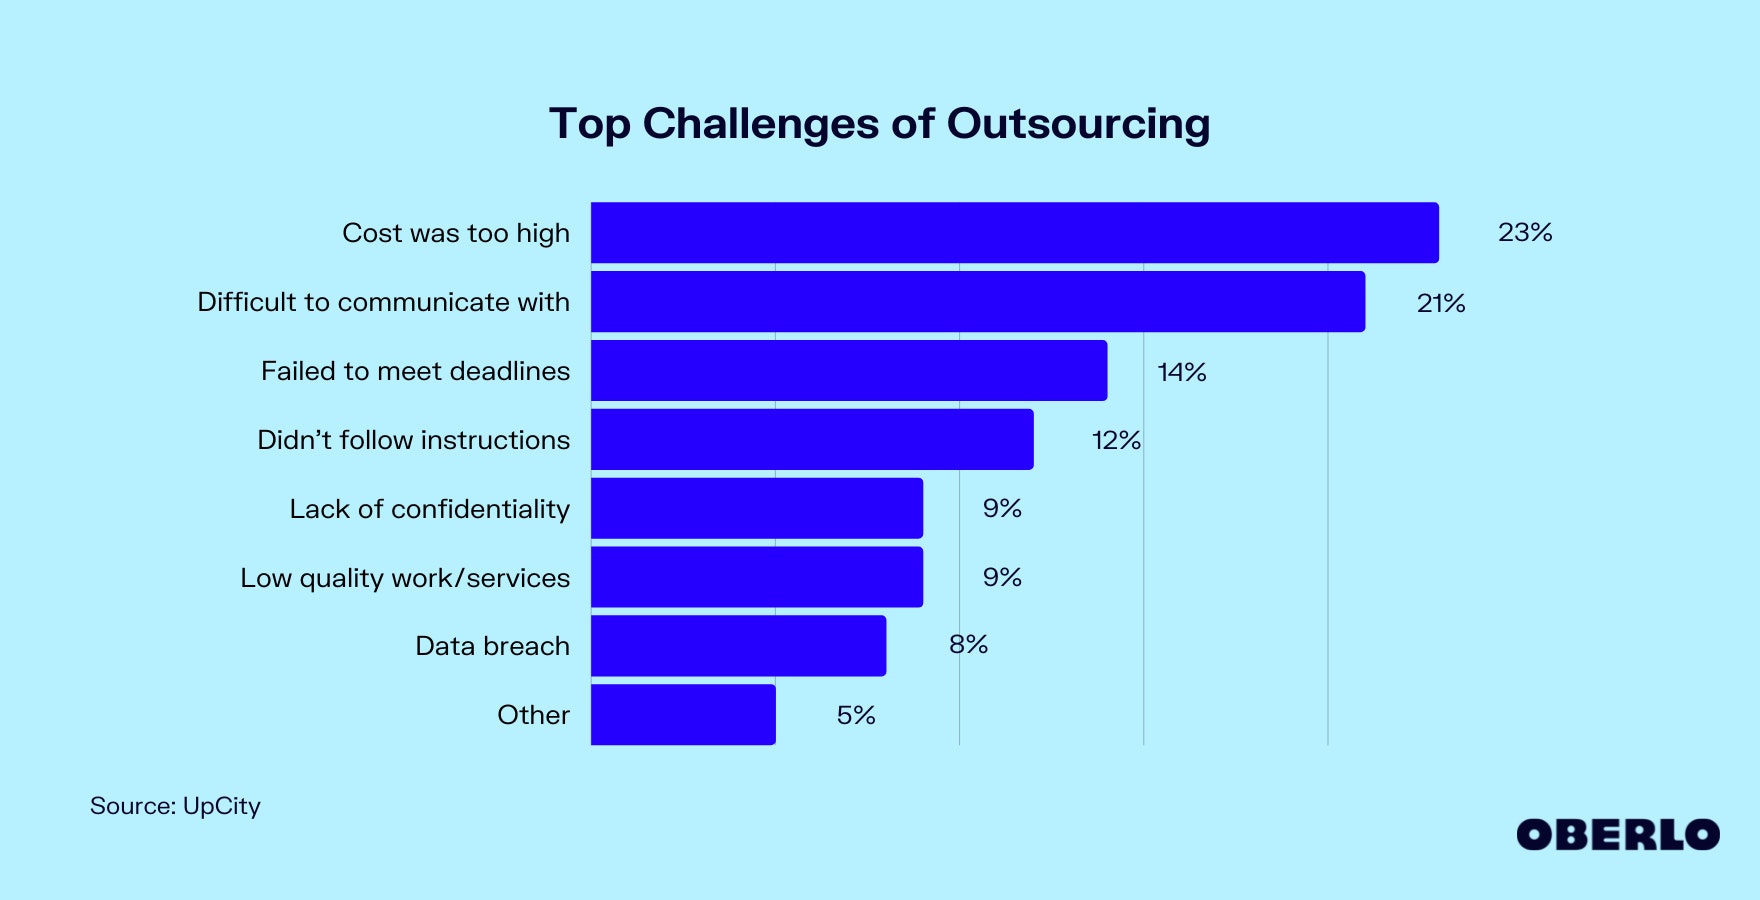 Chart showing the Top Challenges of Outsourcing